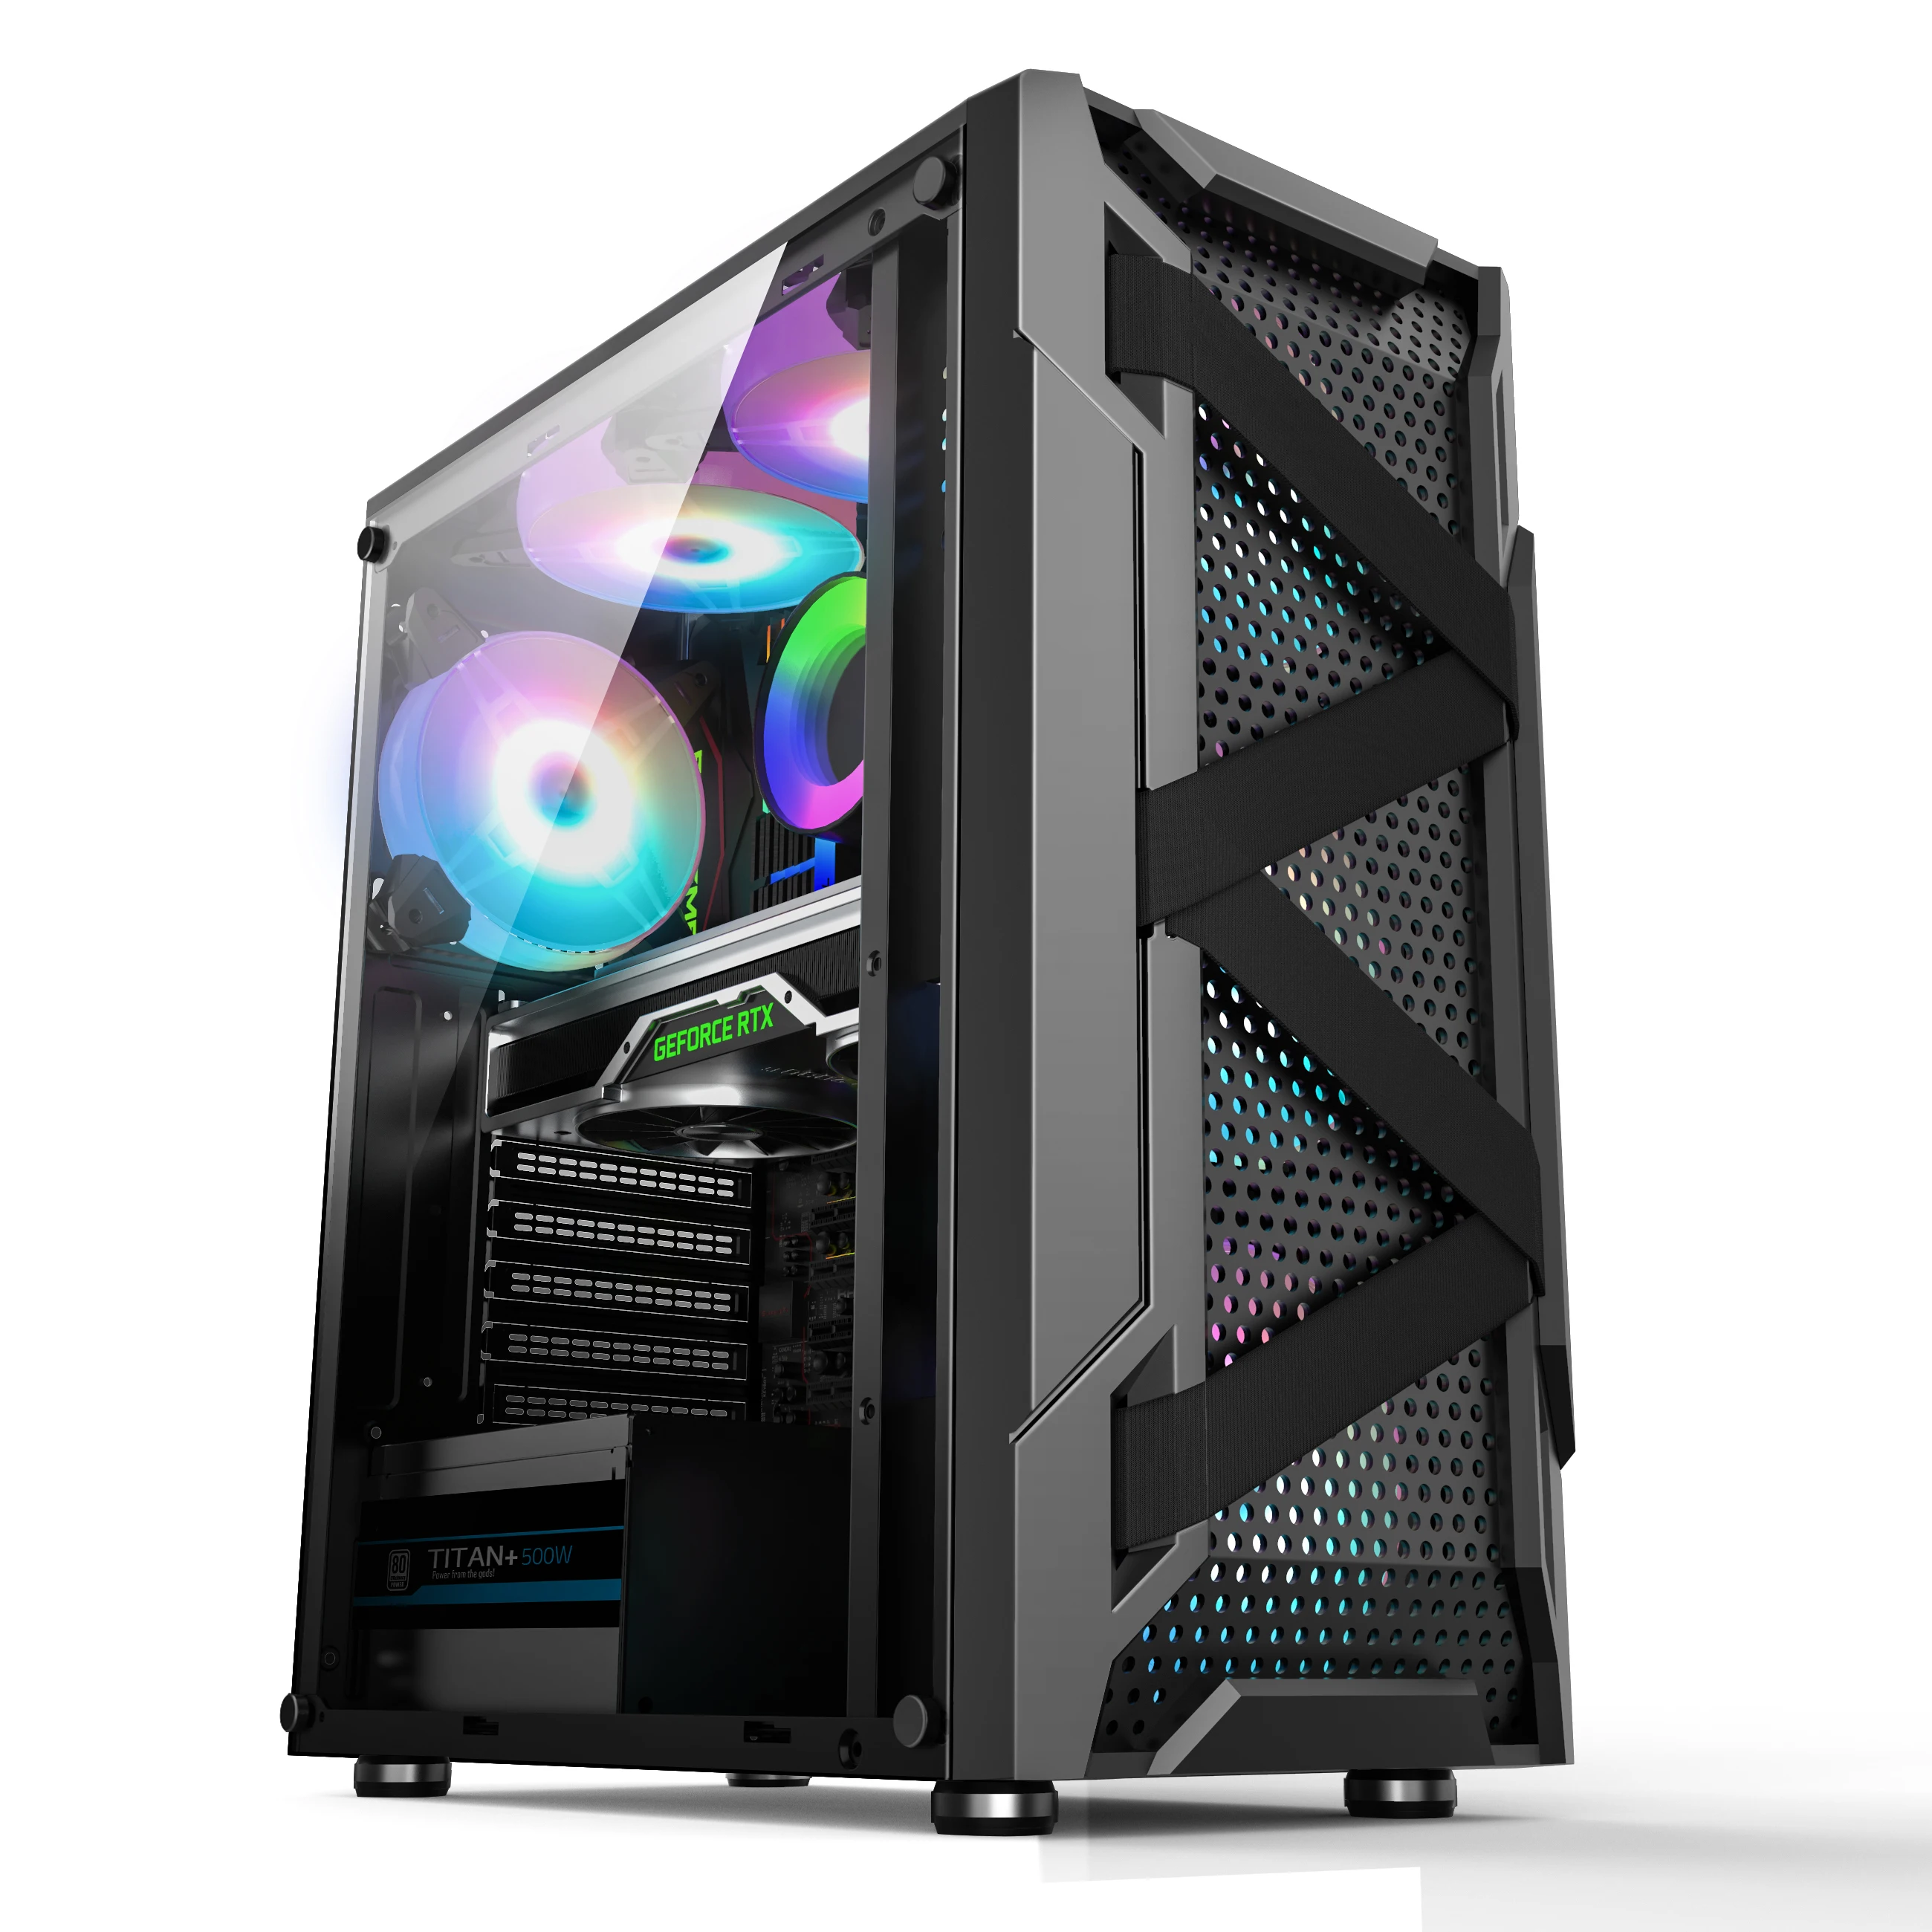 

2021 new design tempered glass ATX full tower gaming pc case High quality gamer cabinet